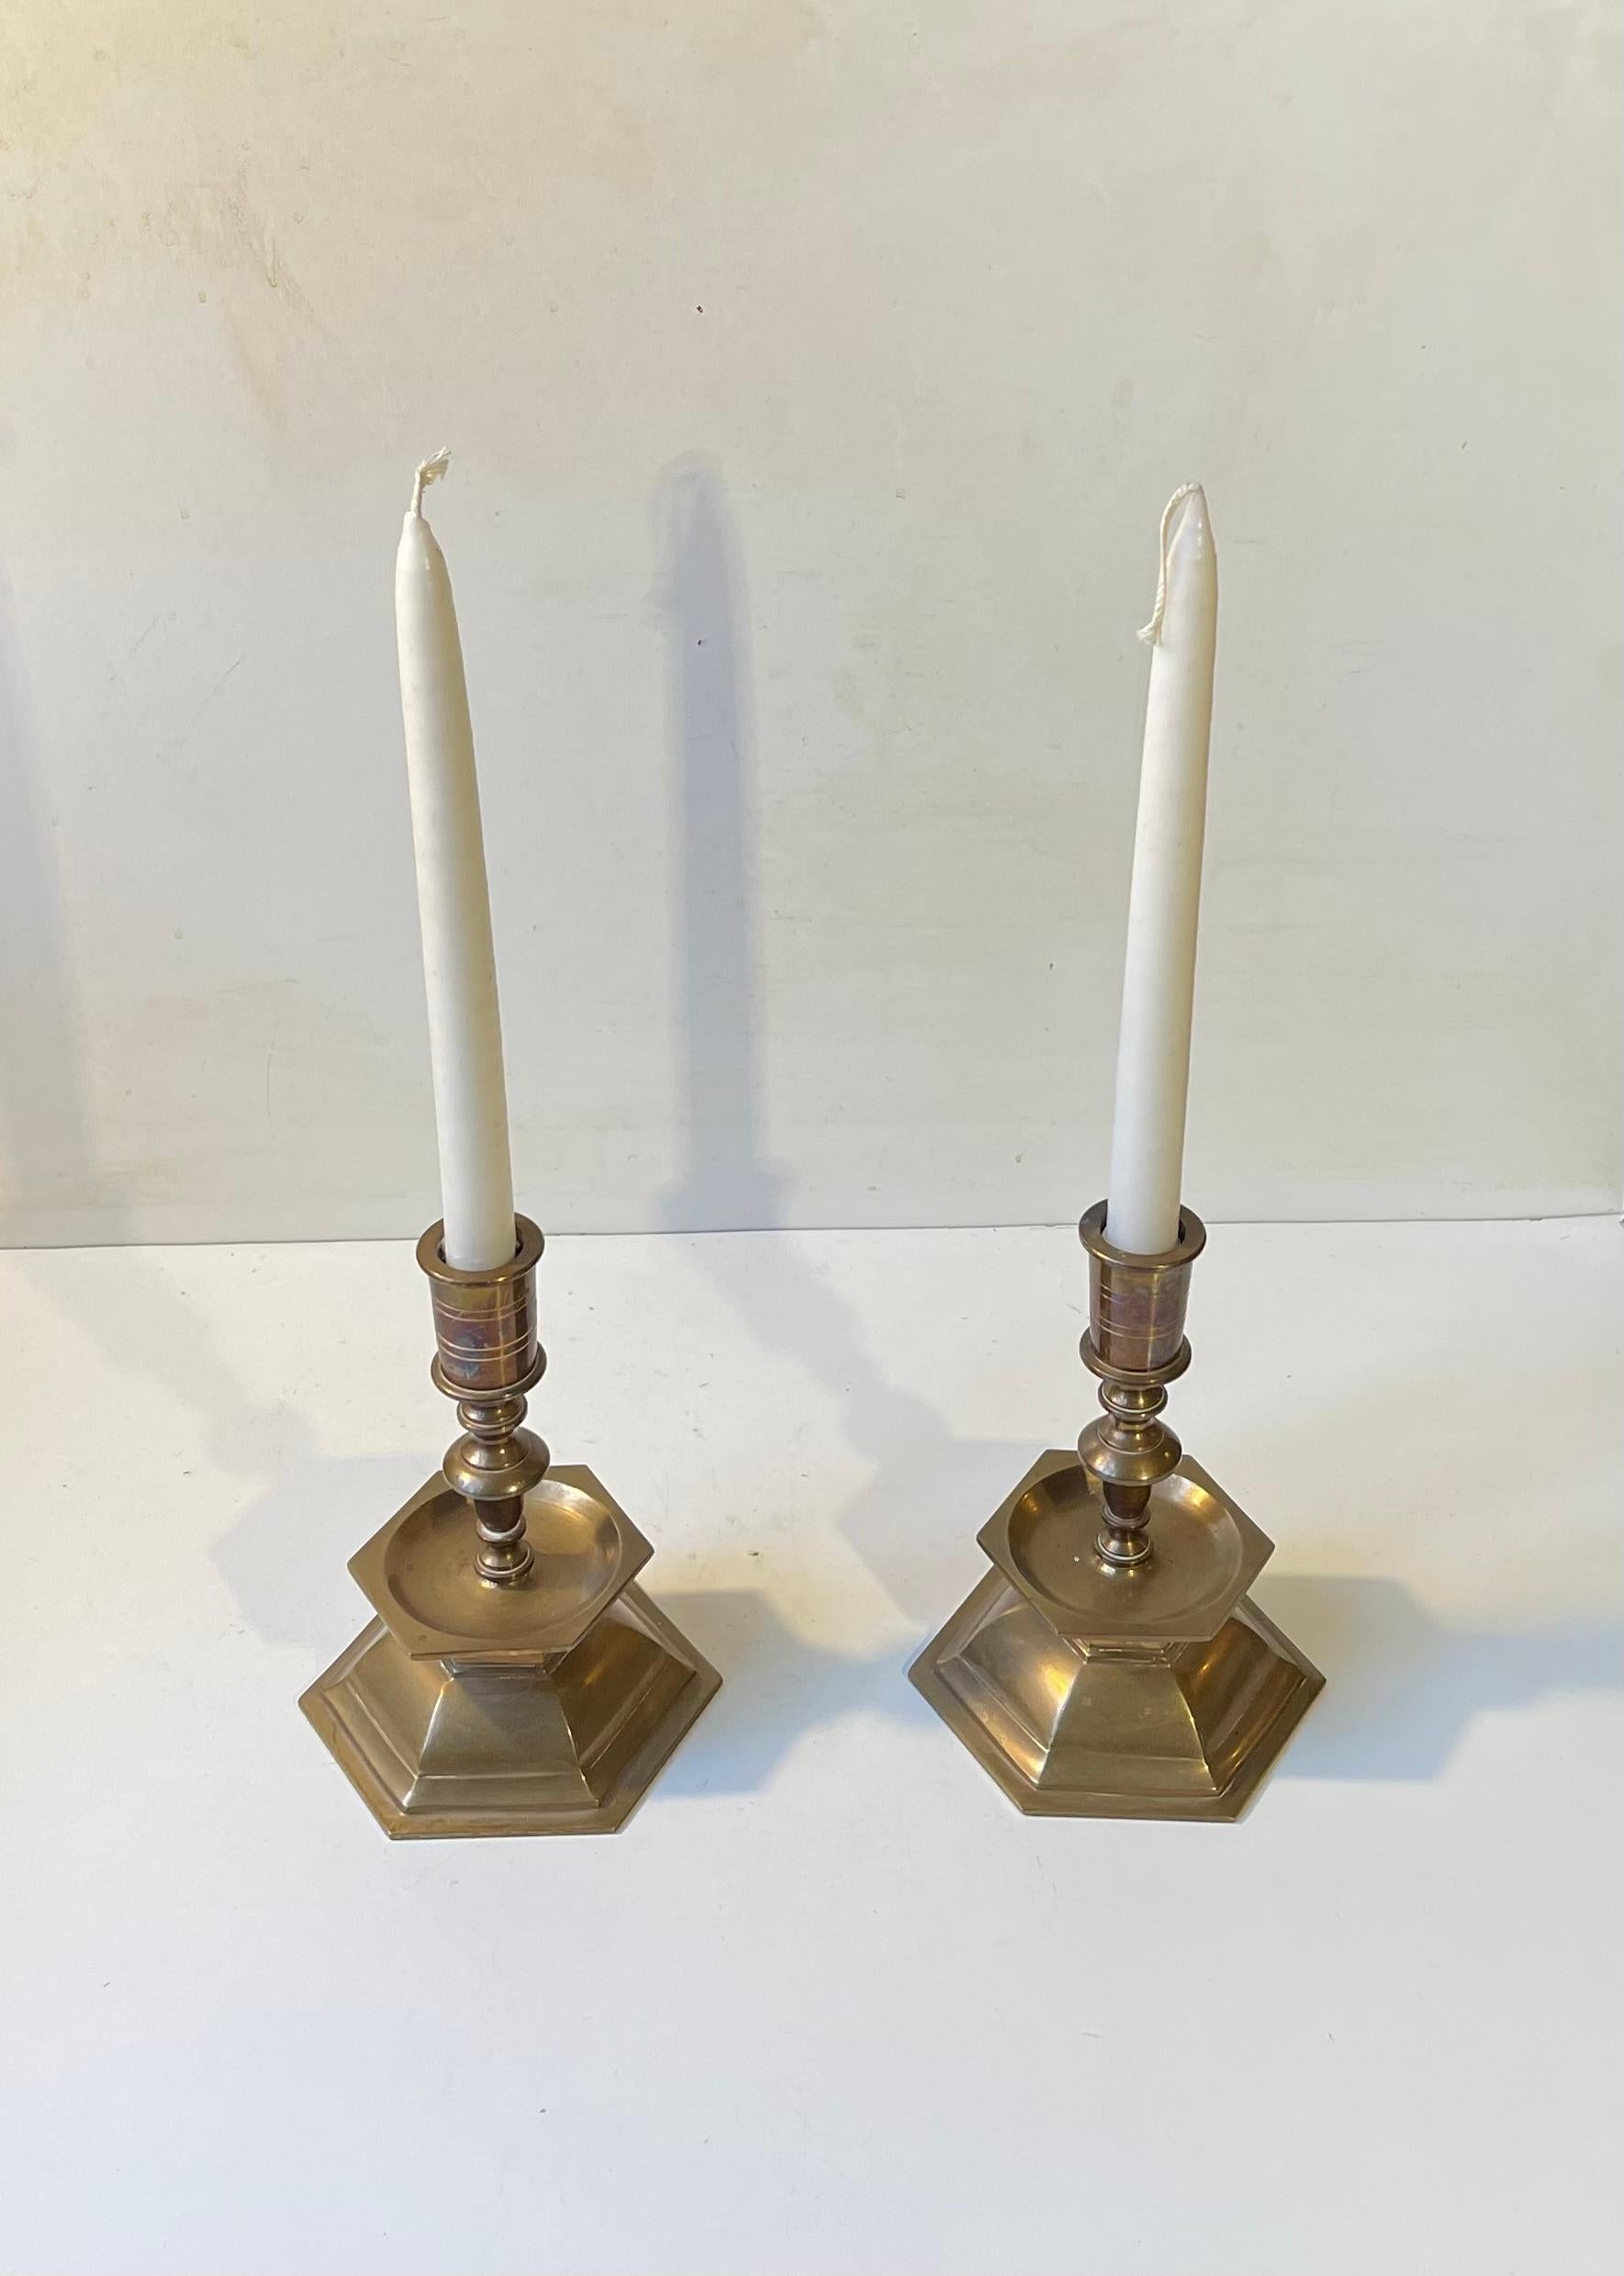 Vintage Danish Church Altar Candlesticks in Brass, 1930s In Good Condition For Sale In Esbjerg, DK